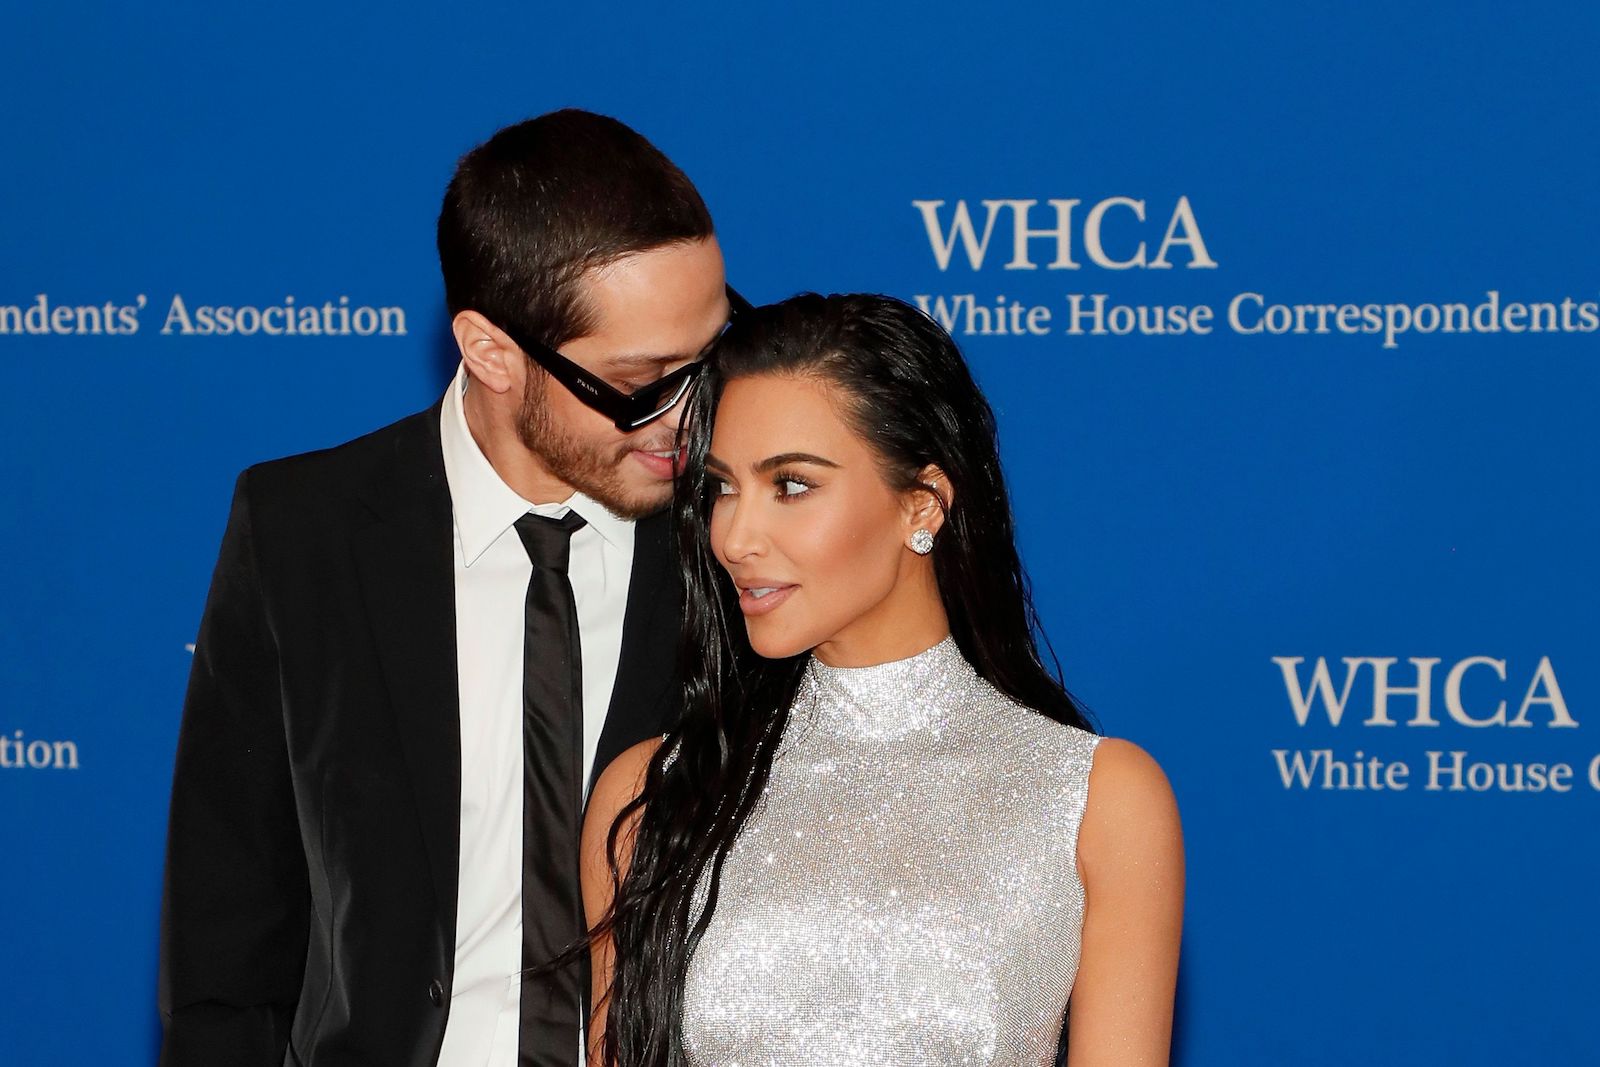 Pete Davidson and Kim Kardashian attended the White House Correspondents Association dinner in 2022 and he smiles as he looks at them